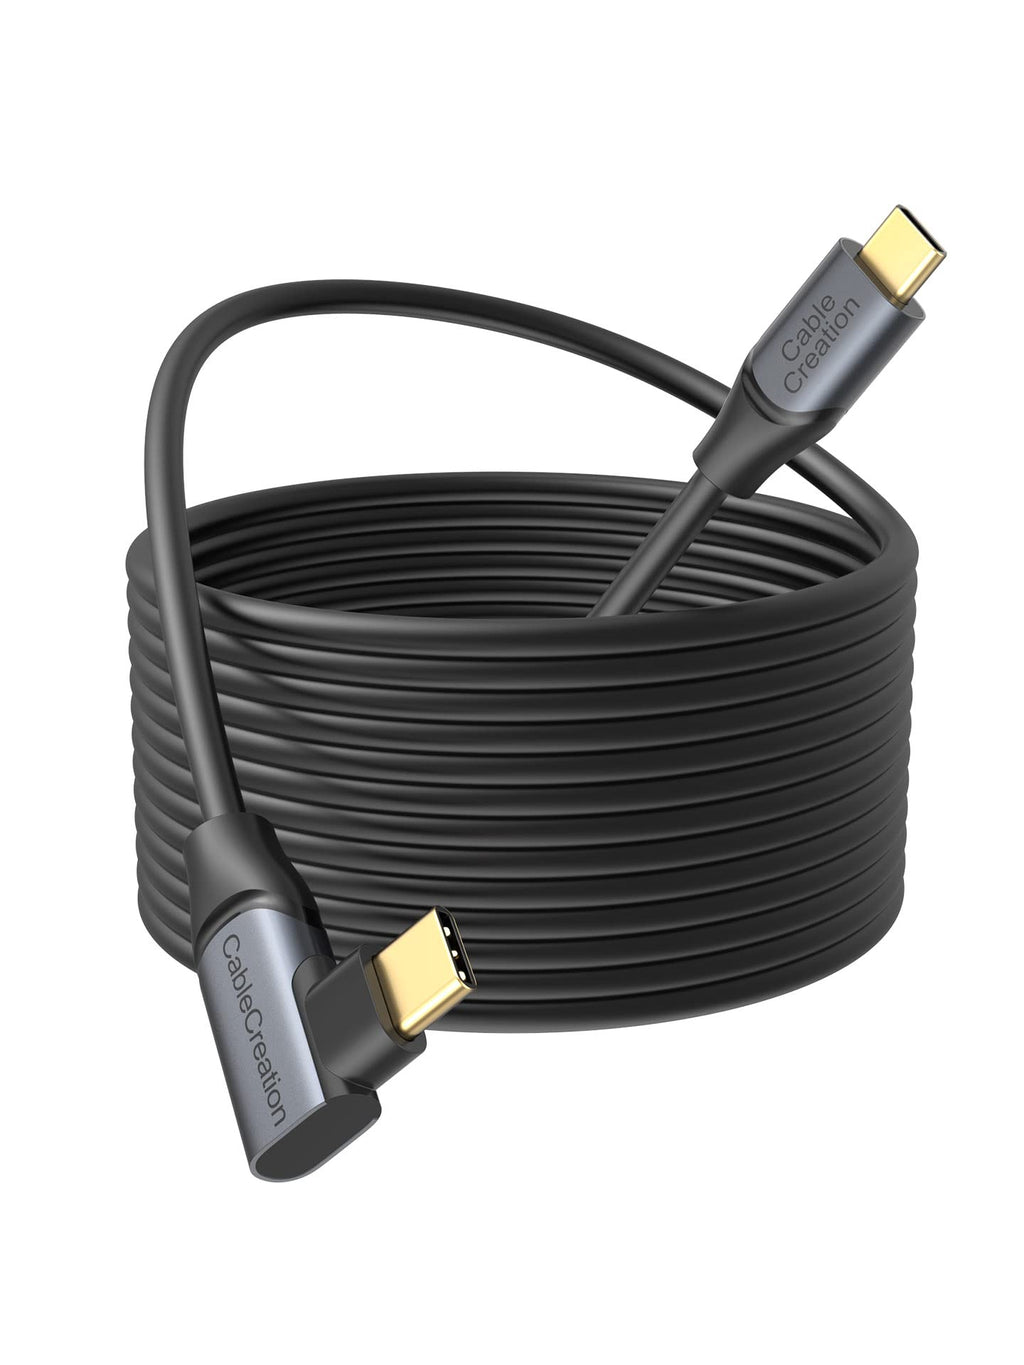  [AUSTRALIA] - CableCreation 16FT Link VR Cable Compatible with Meta Quest Pro/Quest2/Pico4 and More VR Headset, 5Gbps USB C to C High Speed Cable, VR Headsets Accessories Gaming PC Link Cable 5 Meters.